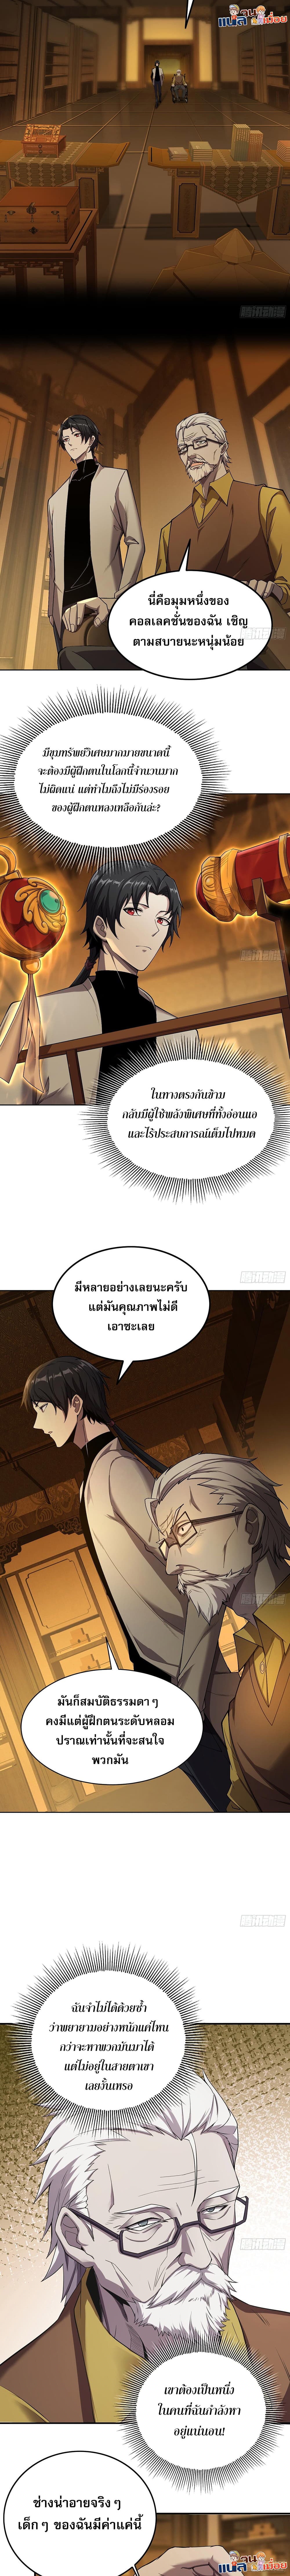 The All-Knowing Cultivator ผู้ฝึกตนผู้รอบรู้ 2/10